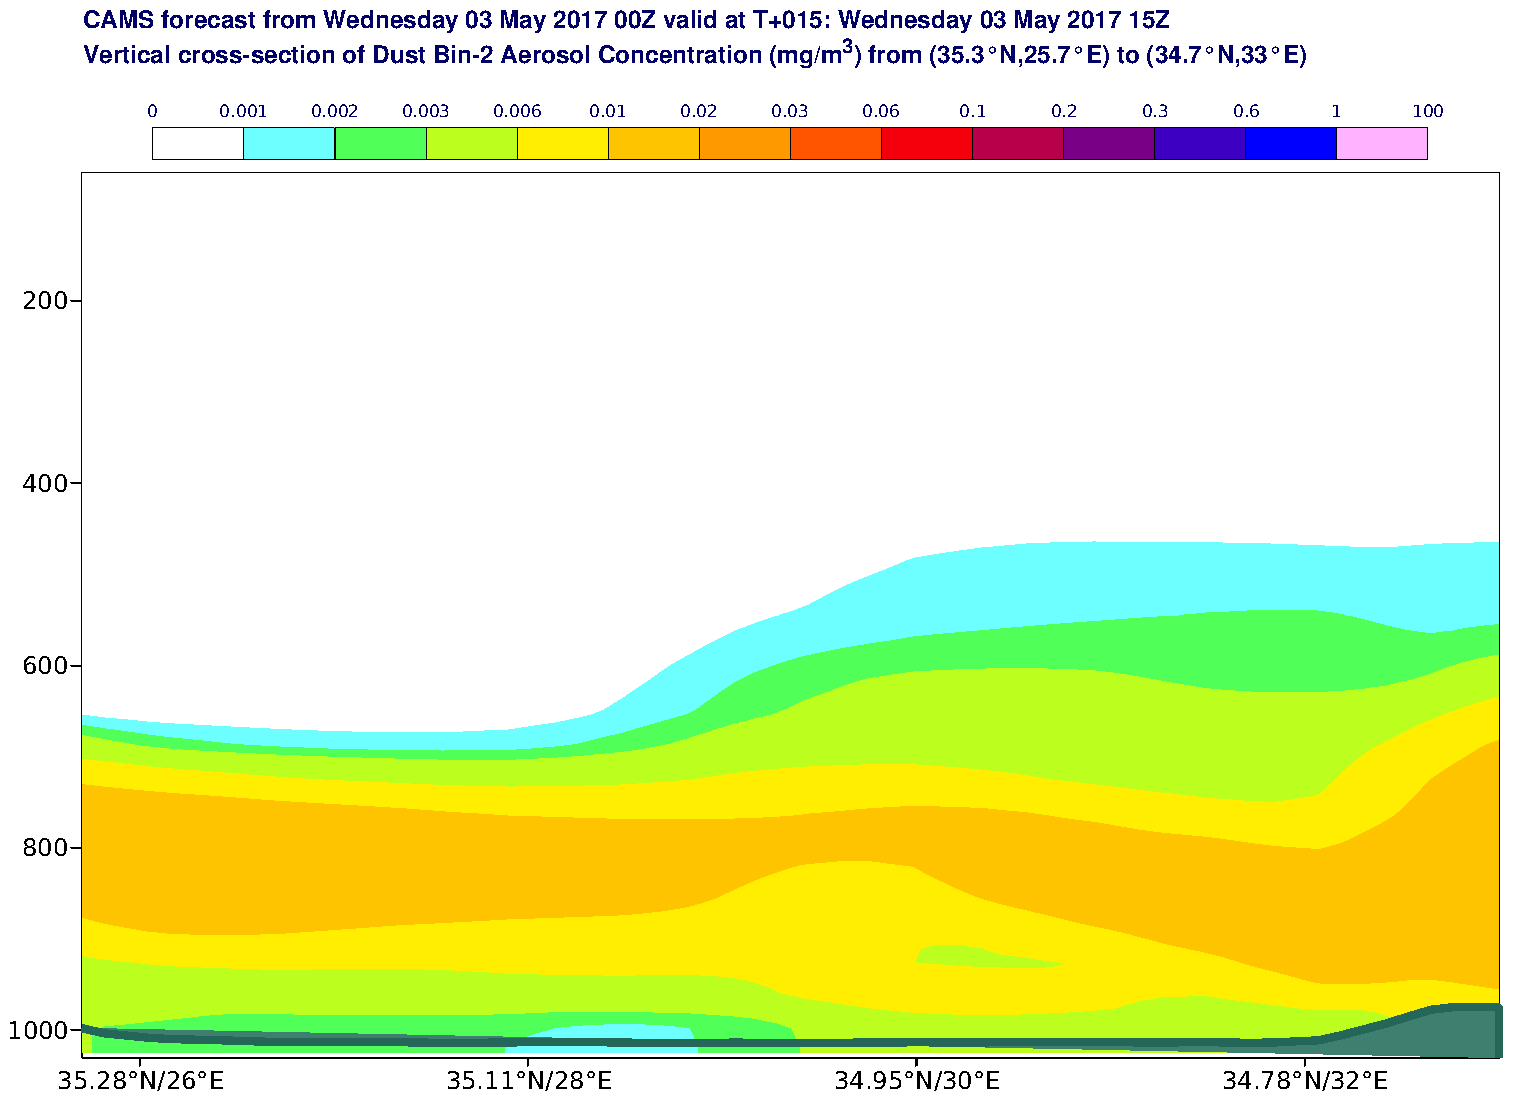 Vertical cross-section of Dust Bin-2 Aerosol Concentration (mg/m3) valid at T15 - 2017-05-03 15:00